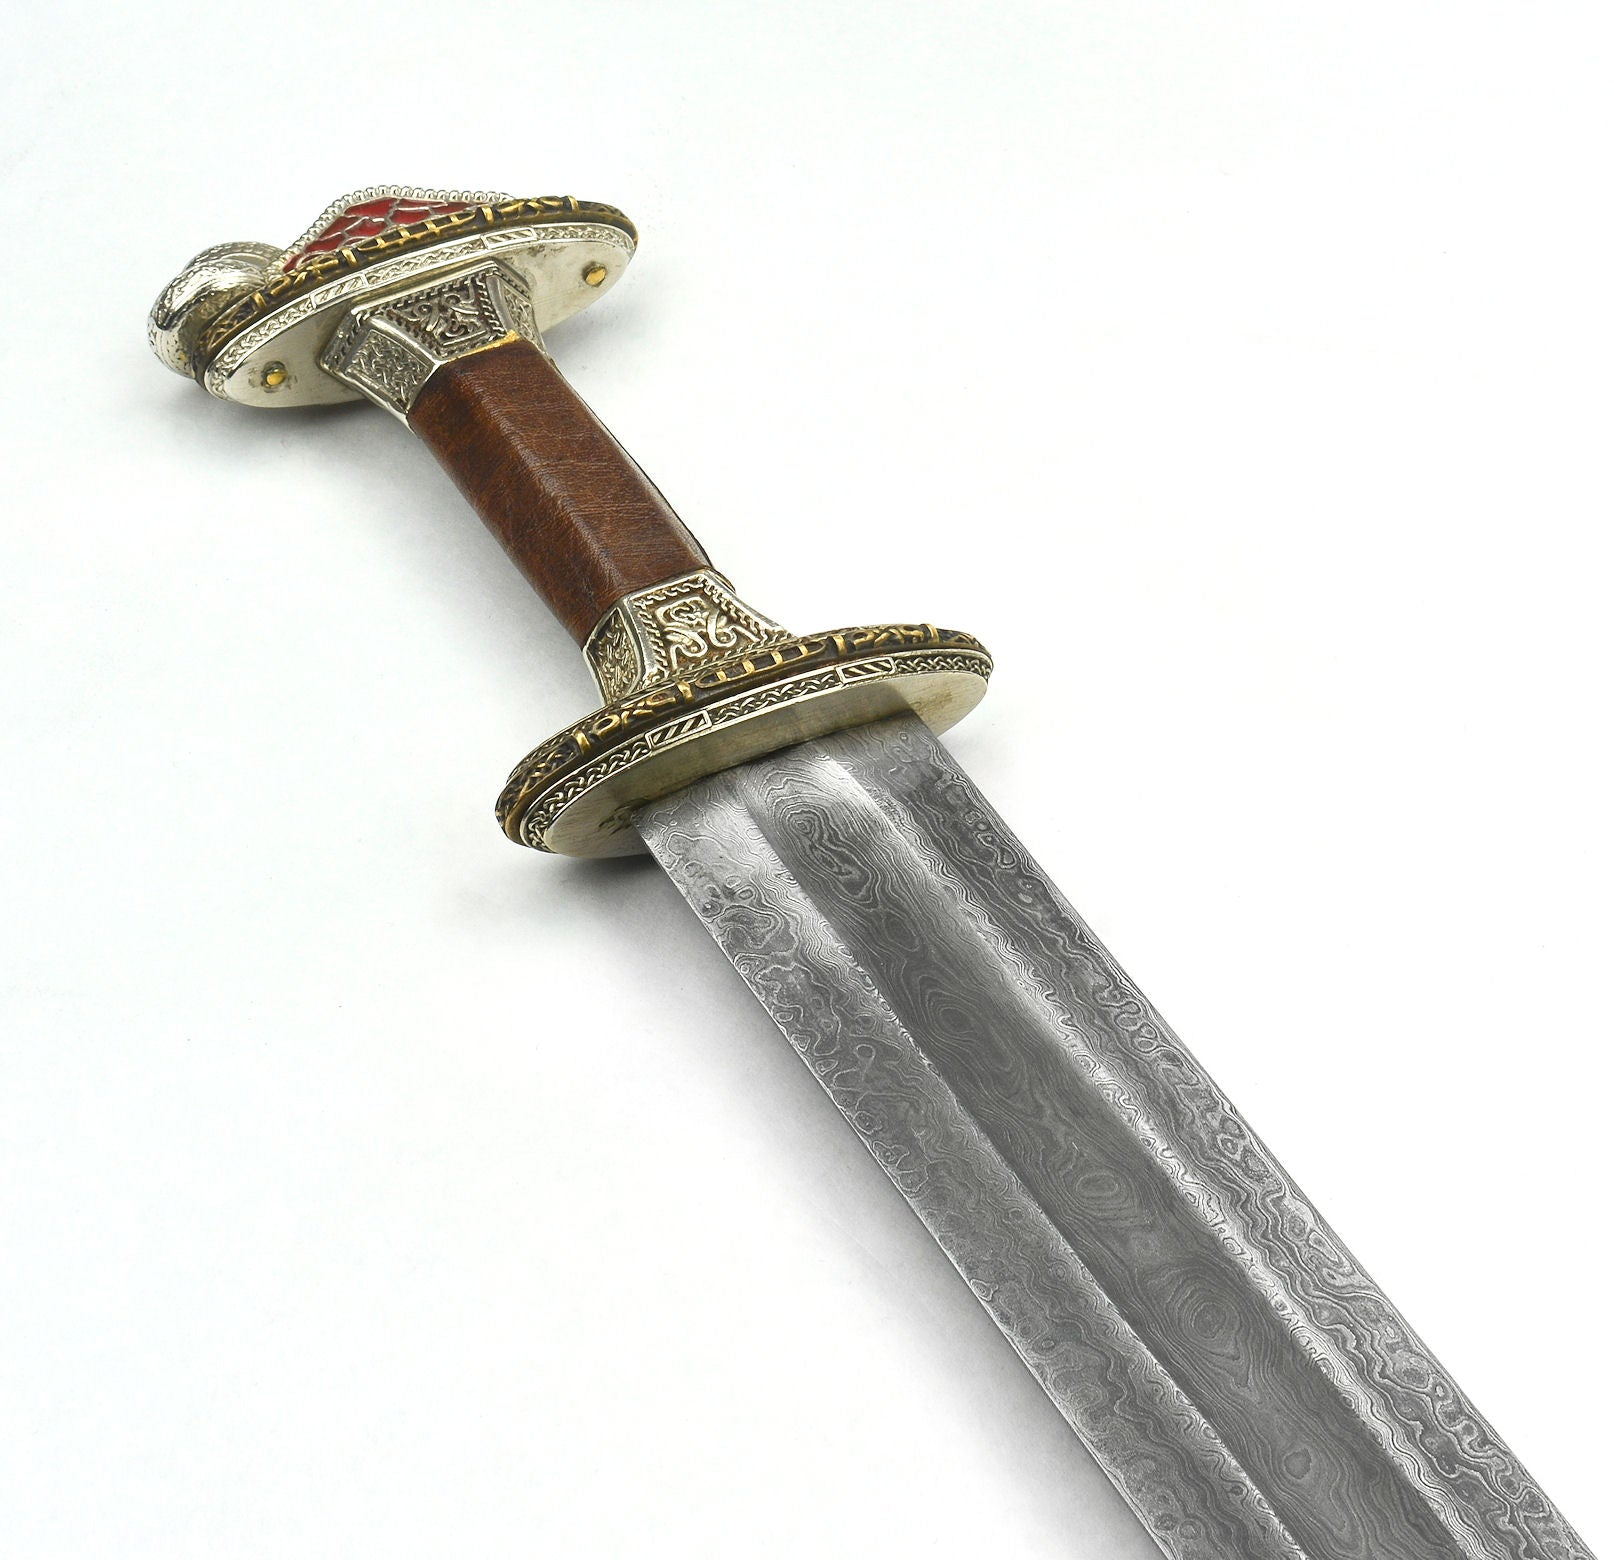 Scandinavian Vendel Chieftain's Sword with Damascus Blade - Tin Plated with Brass Hilt Accents